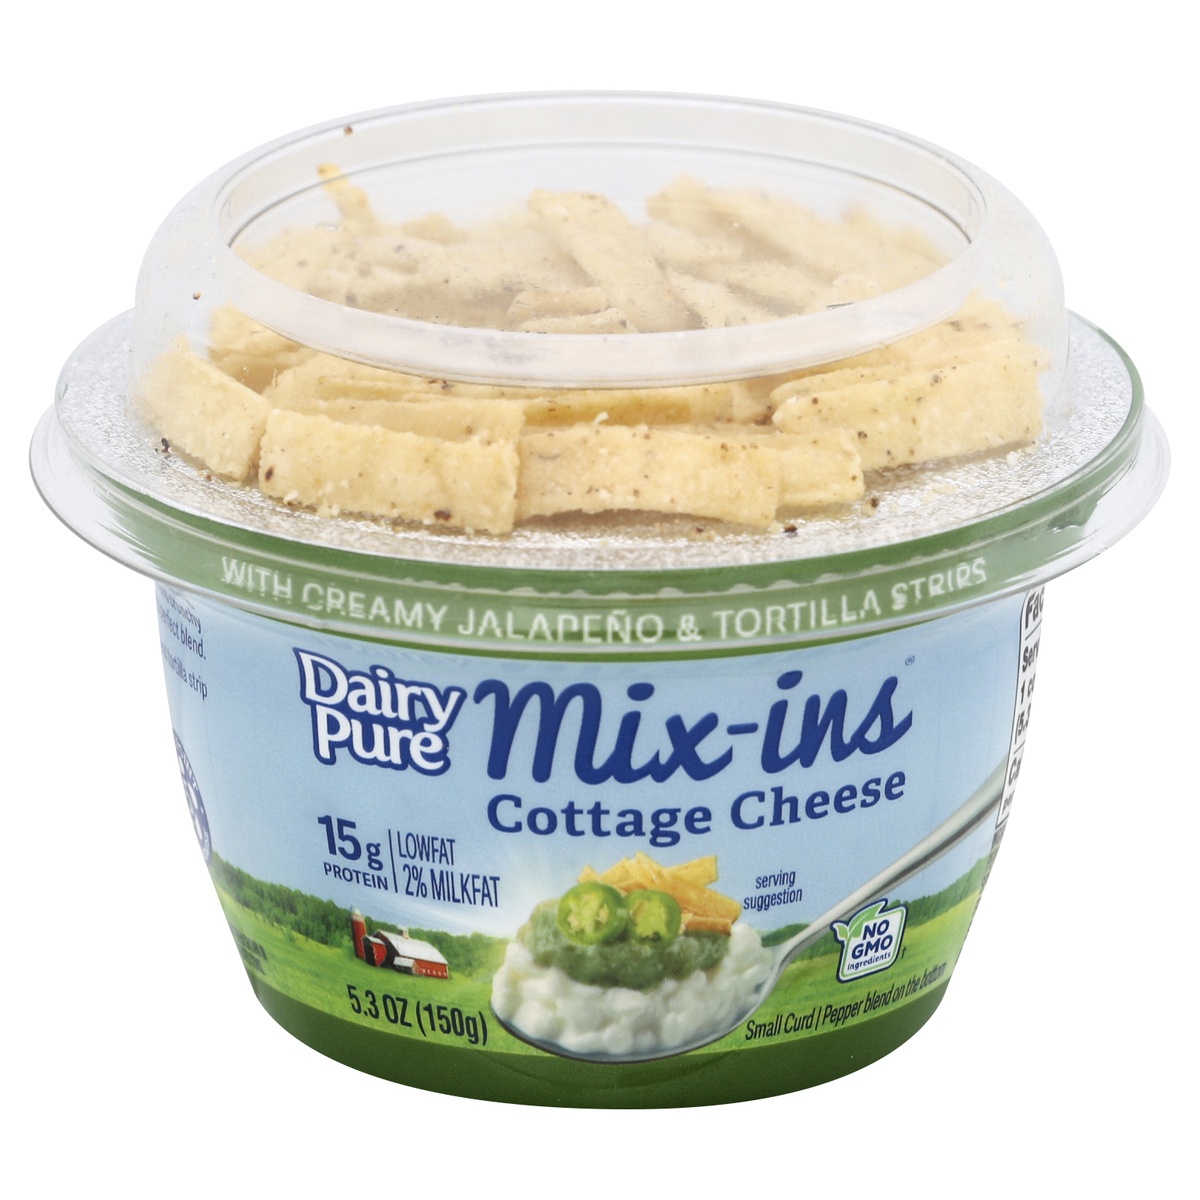 slide 1 of 1, Dairy Pure Cottage Cheese Mix-Ins with Creamy Jalapeno and Tortilla Strips, 5.3 oz